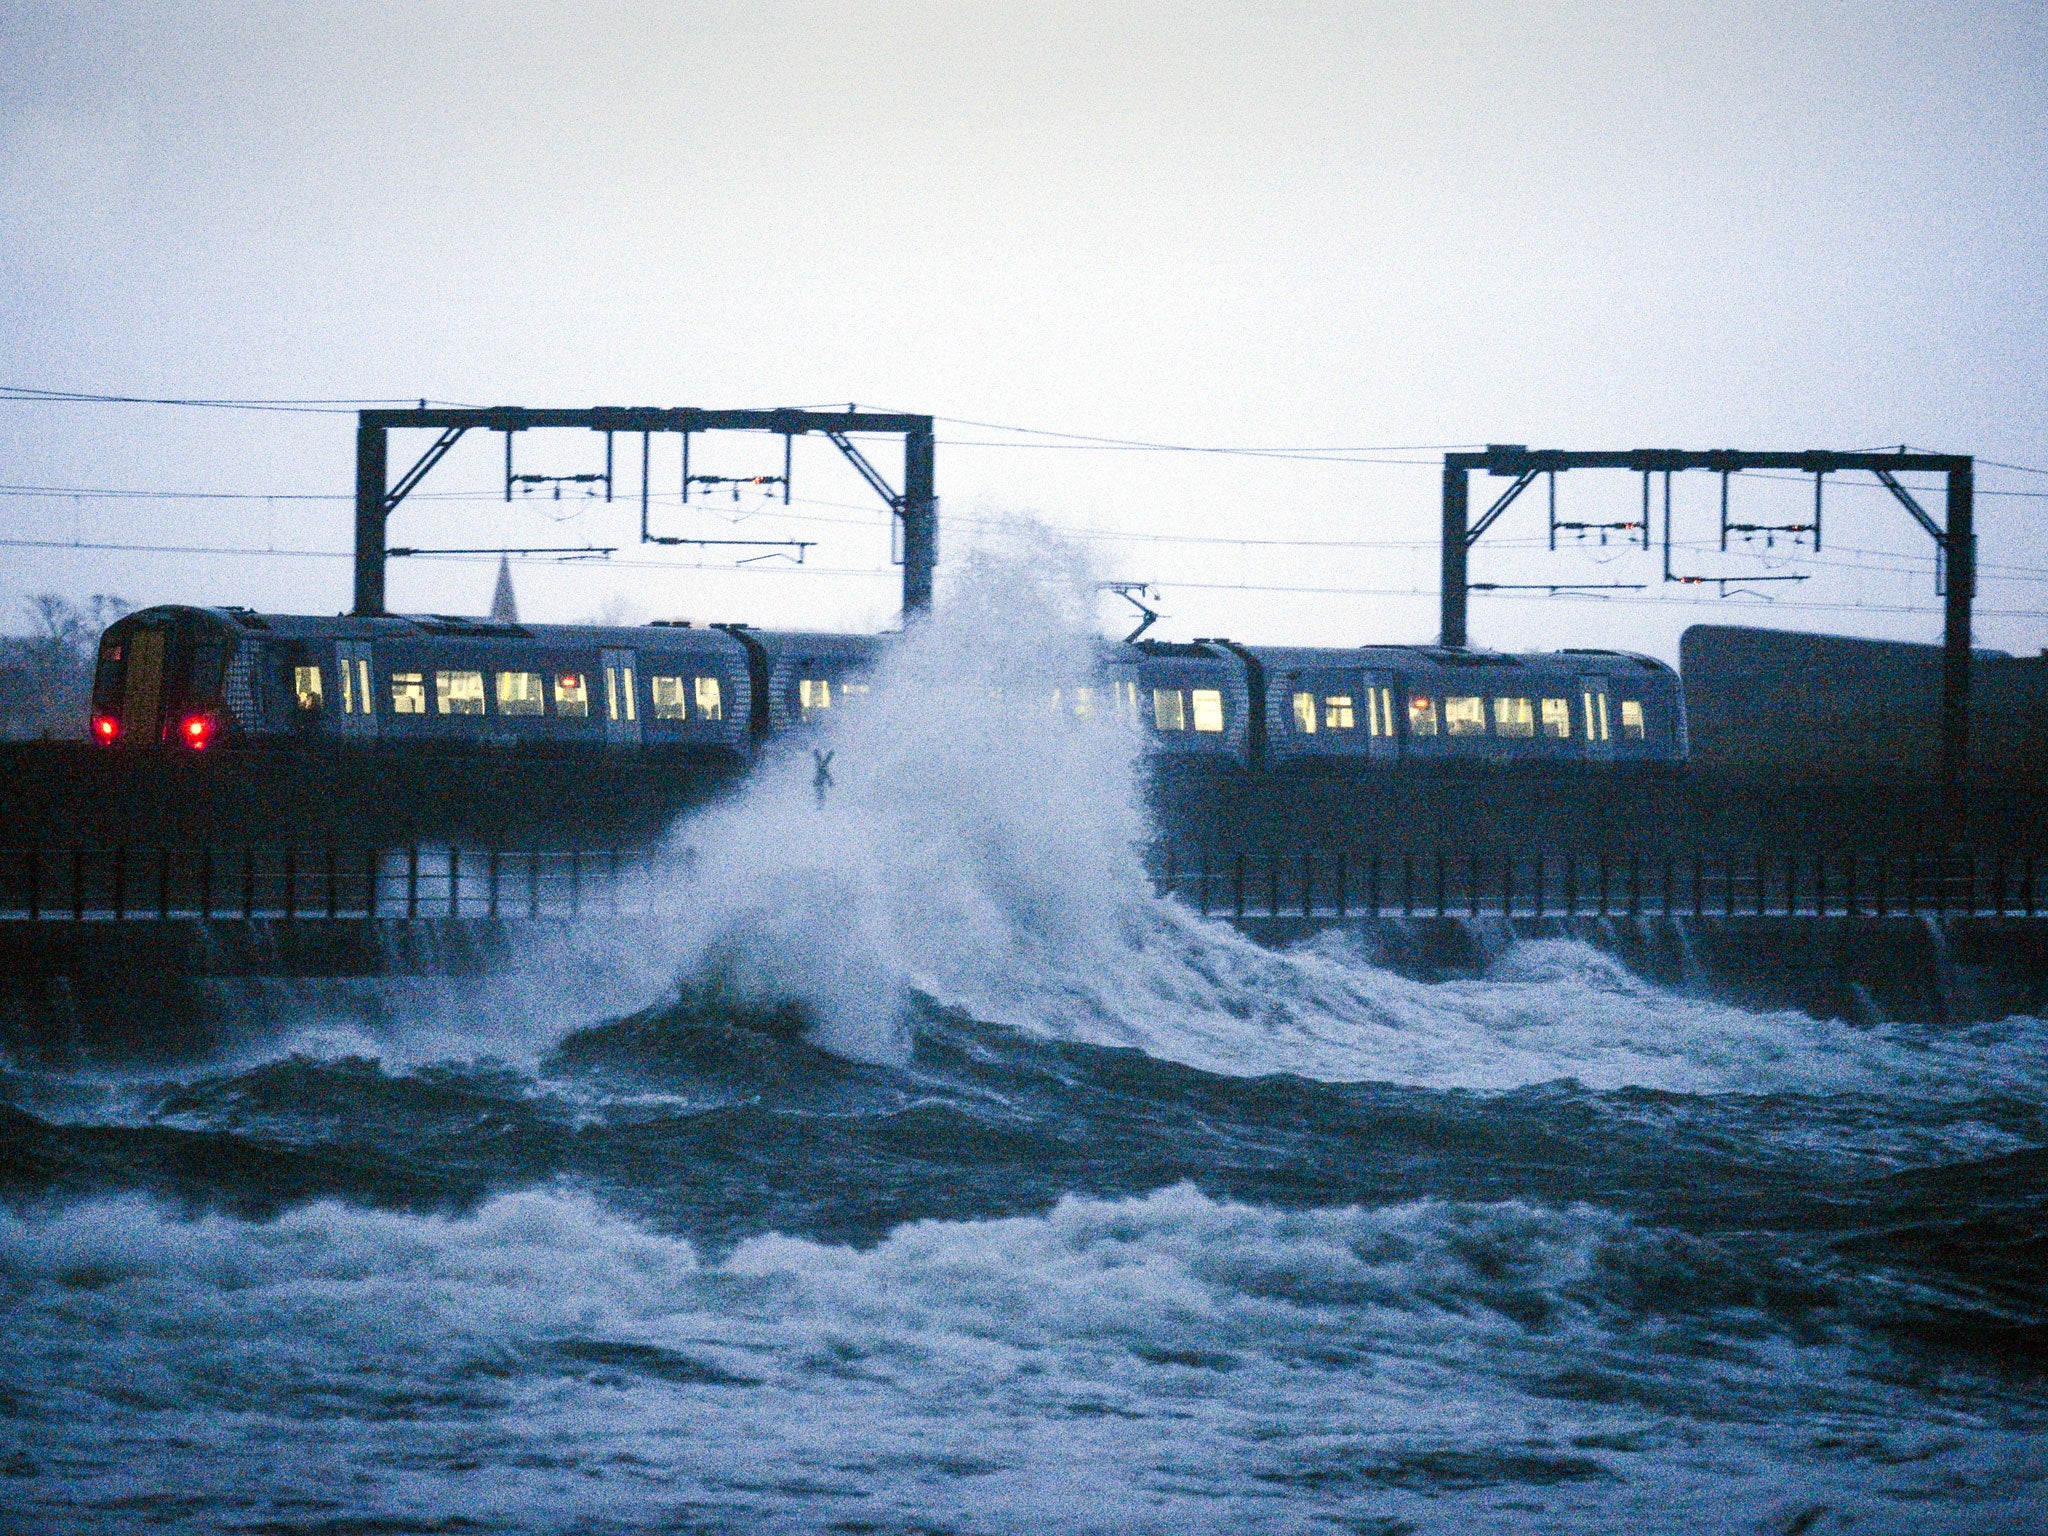 A train leaves Saltcoats station as a large wave crashes nearby on December 27, 2013 in Saltcoats, Scotland. Severe weather warnings have been issued for many parts of Scotland as the country is affected by gale force winds and heavy rain